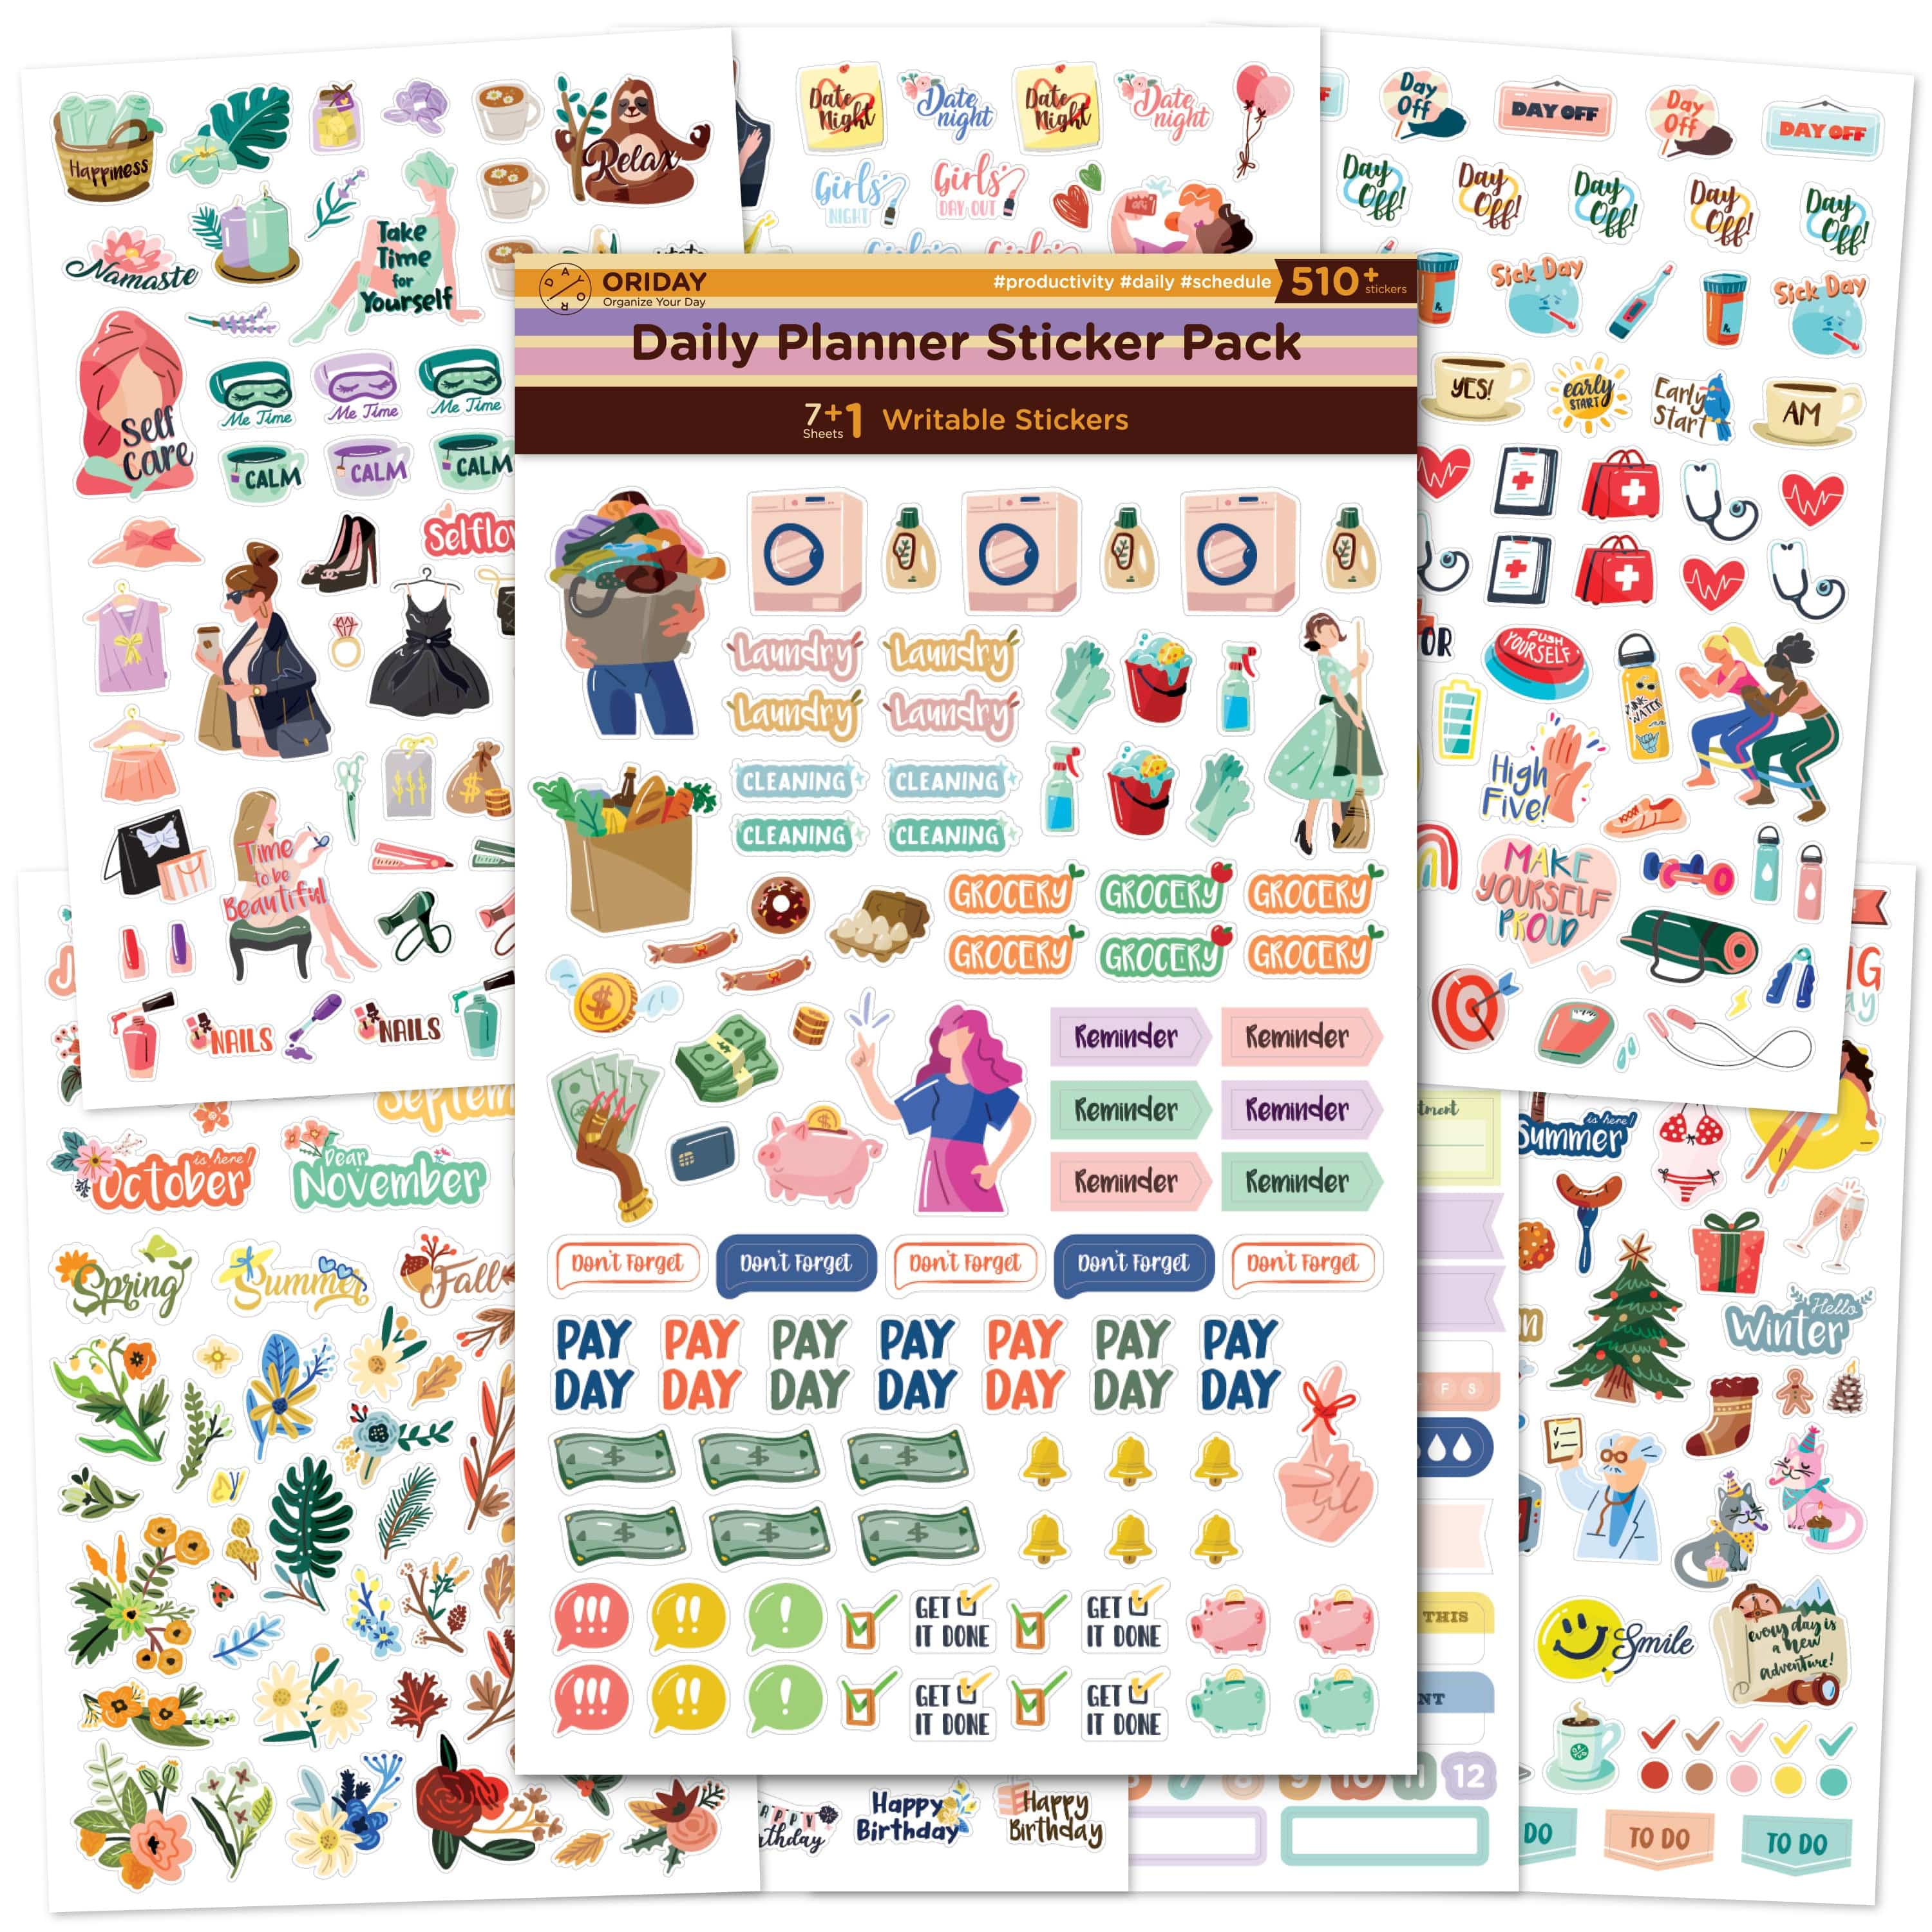 Planner Sticker Pack, Holiday